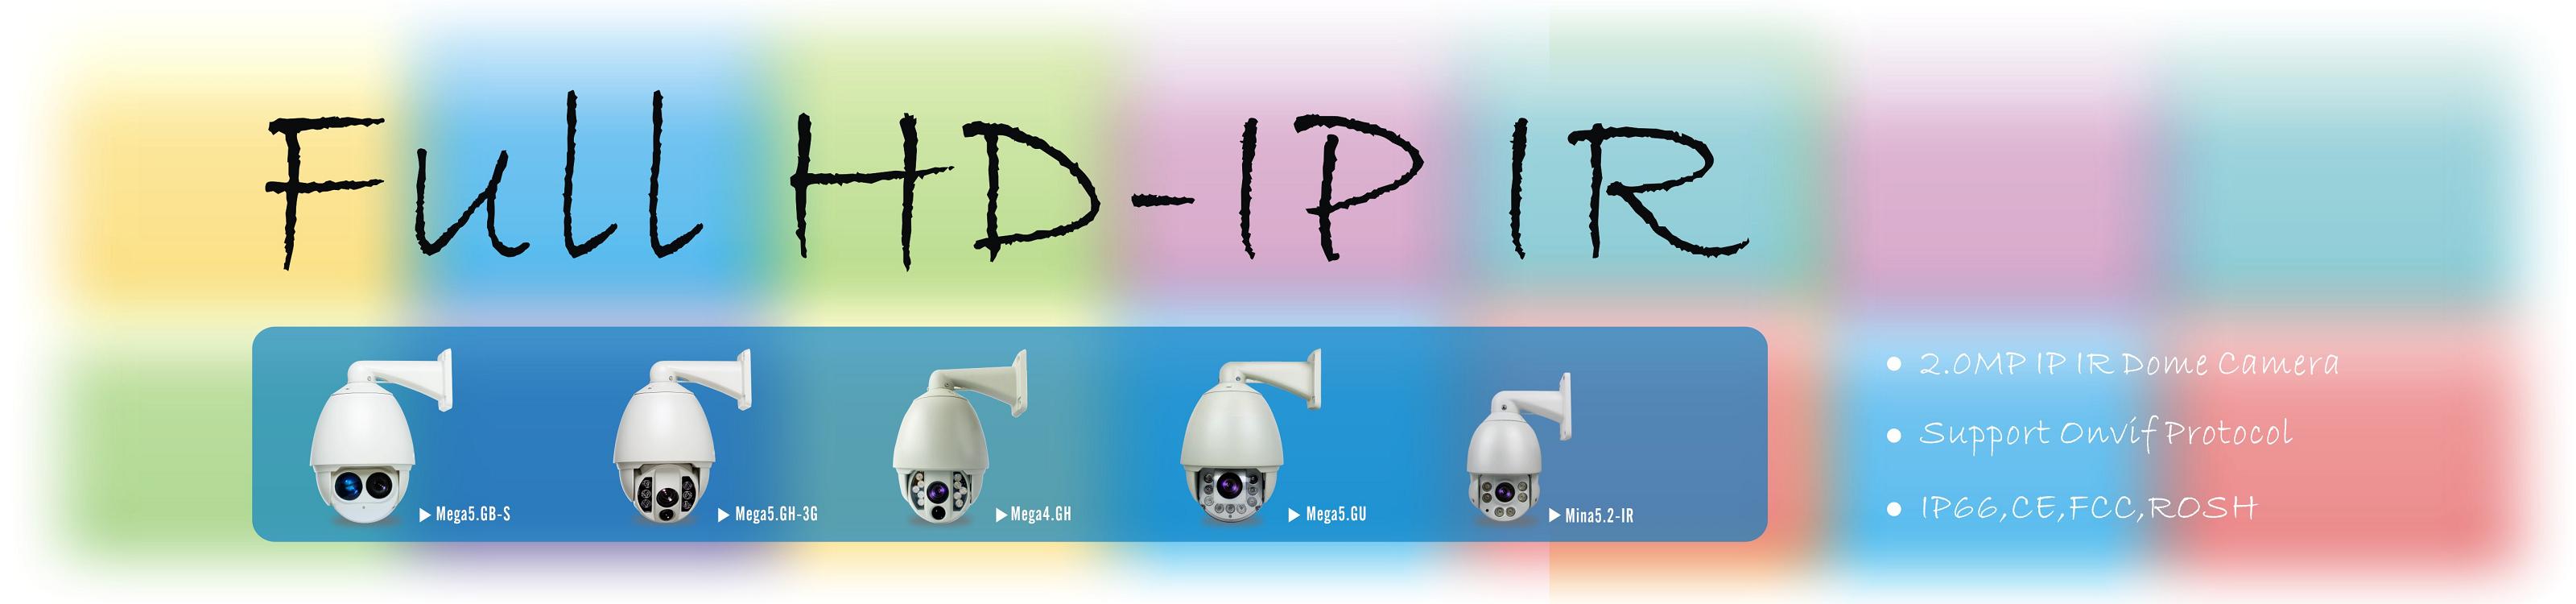 SD IP High Speed Dome security camera